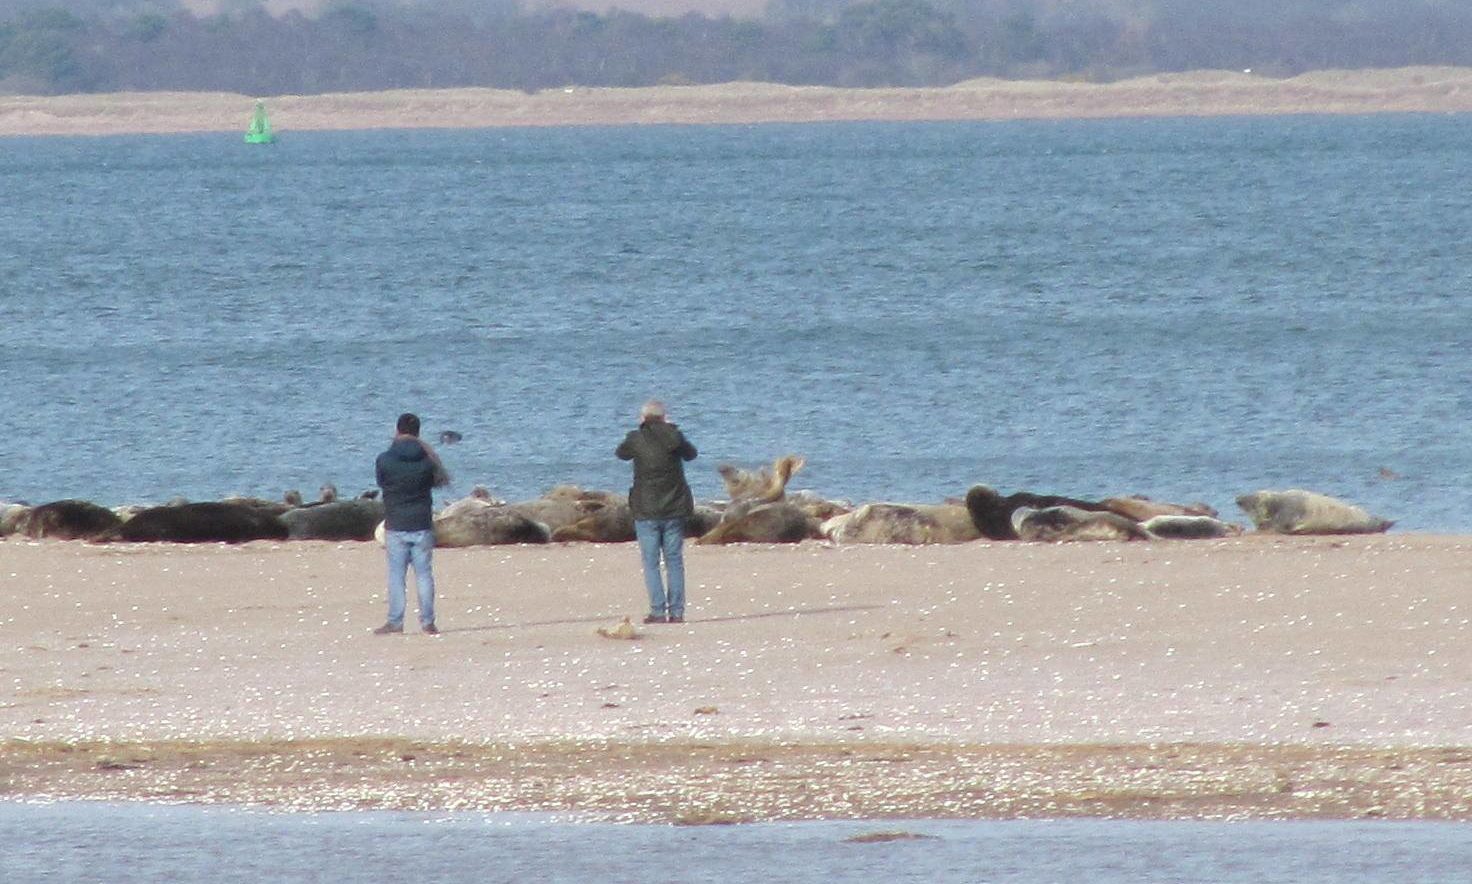 The photograph shared by Scotland's National Nature Reserves of two people too close to seals at Tentsmuir Point